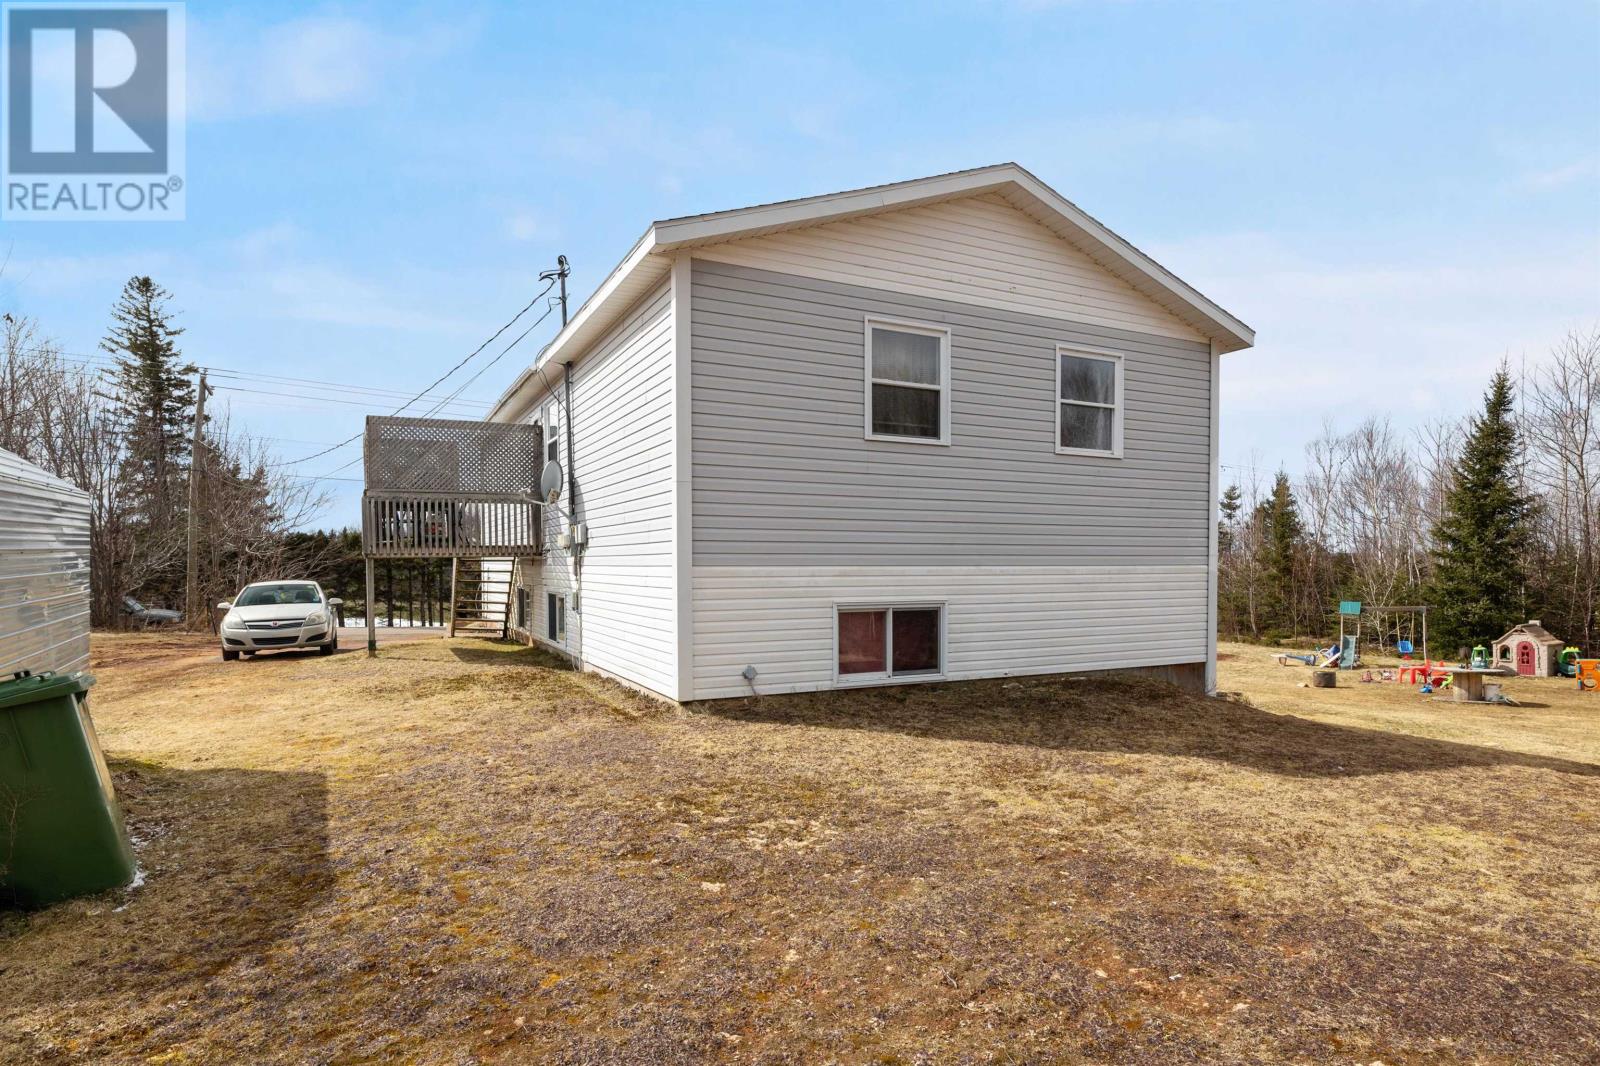 5819/5821 Campbell Road, Victoria Cross, Montague, Prince Edward Island  C0A 1R0 - Photo 18 - 202405682